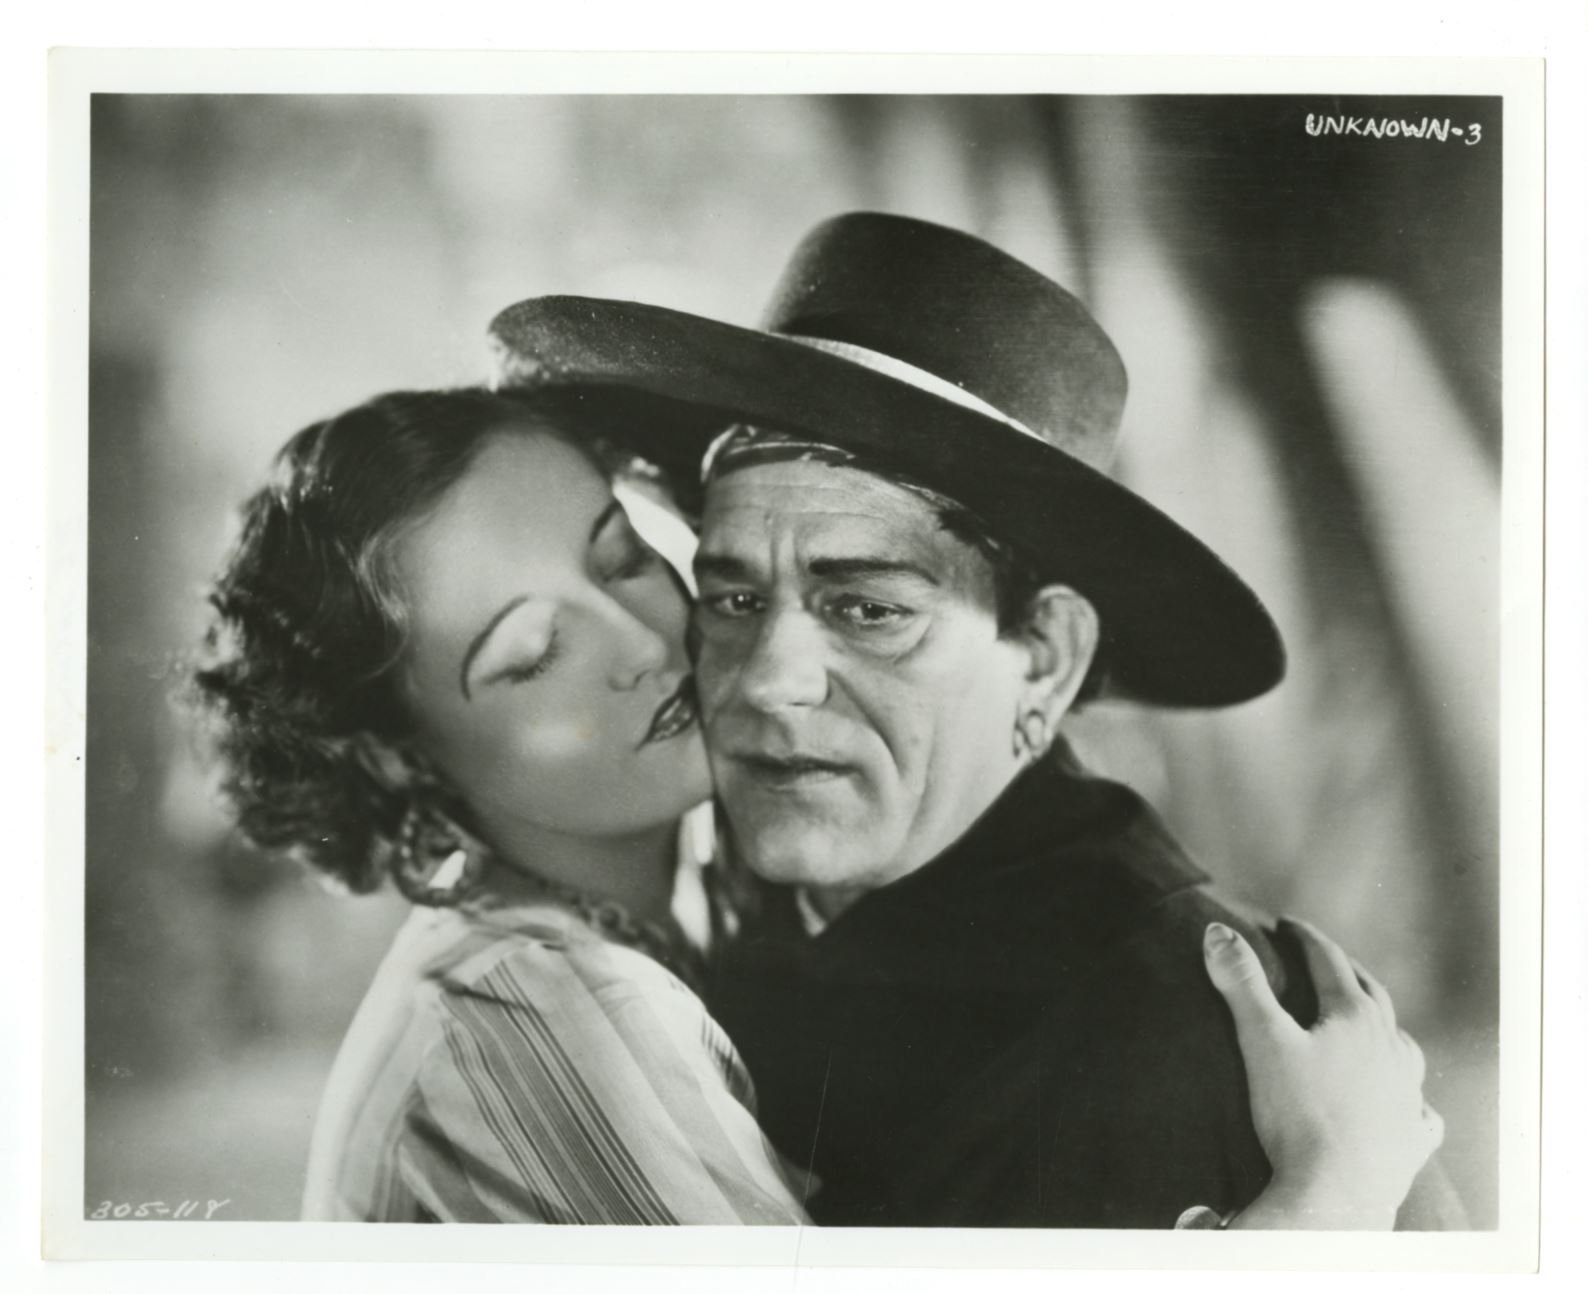 Joan Crawford and Lon Chaney in The Unknown (1927)